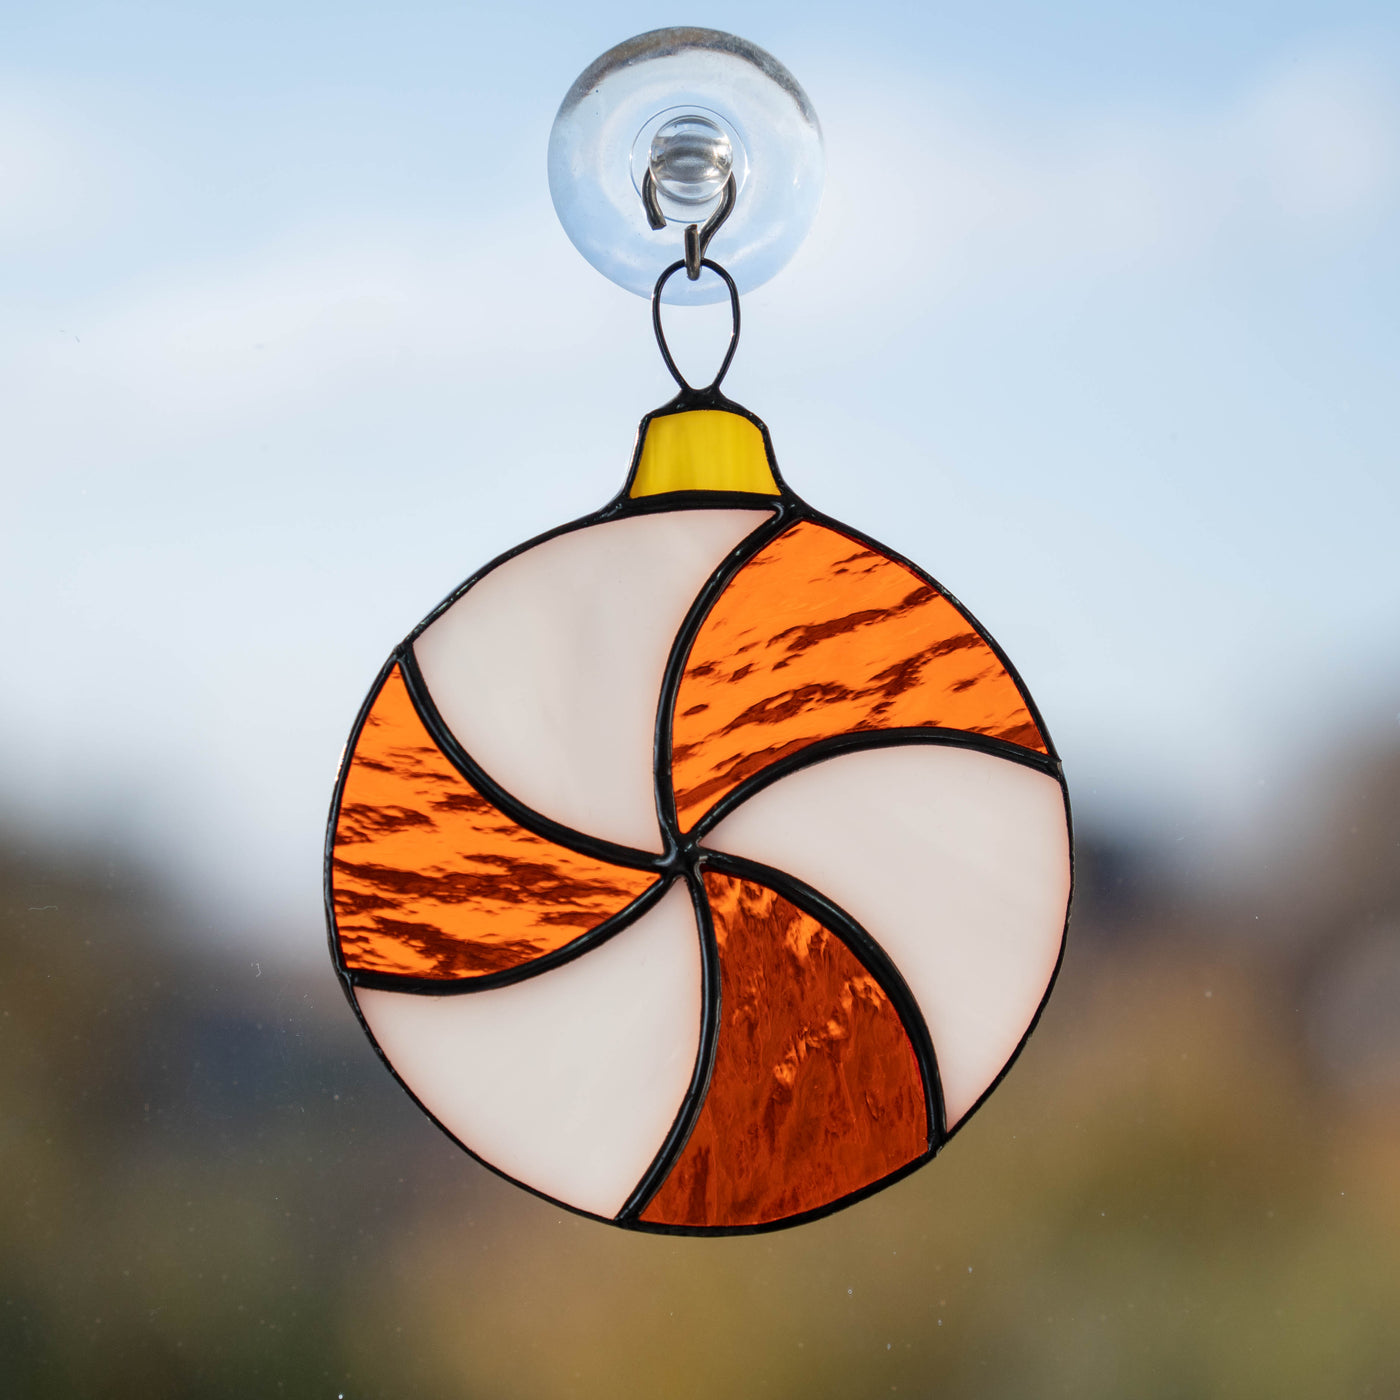 Round white and orange candy suncatcher of stained glass